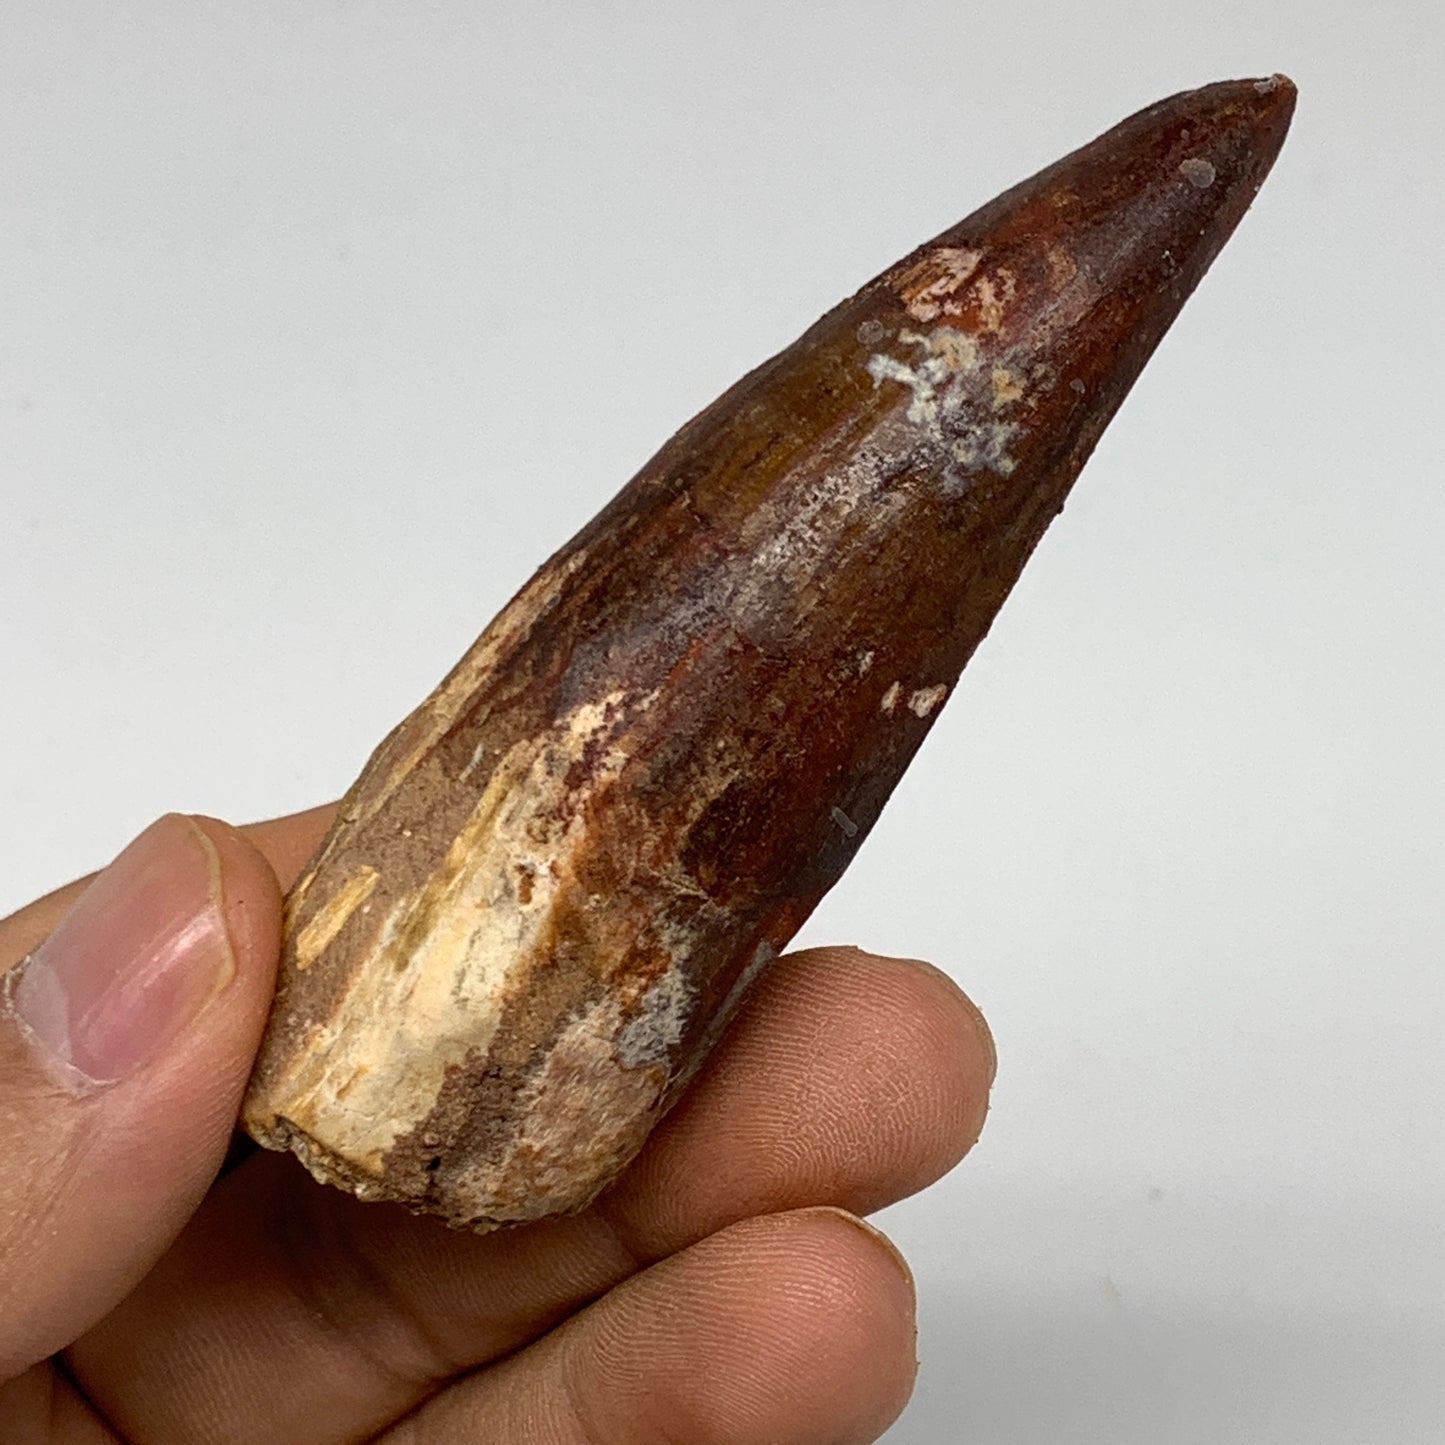 36g, 3.2"X0.9"x 0.8", Rare Natural Fossils Spinosaurus Tooth from Morocco, F3258